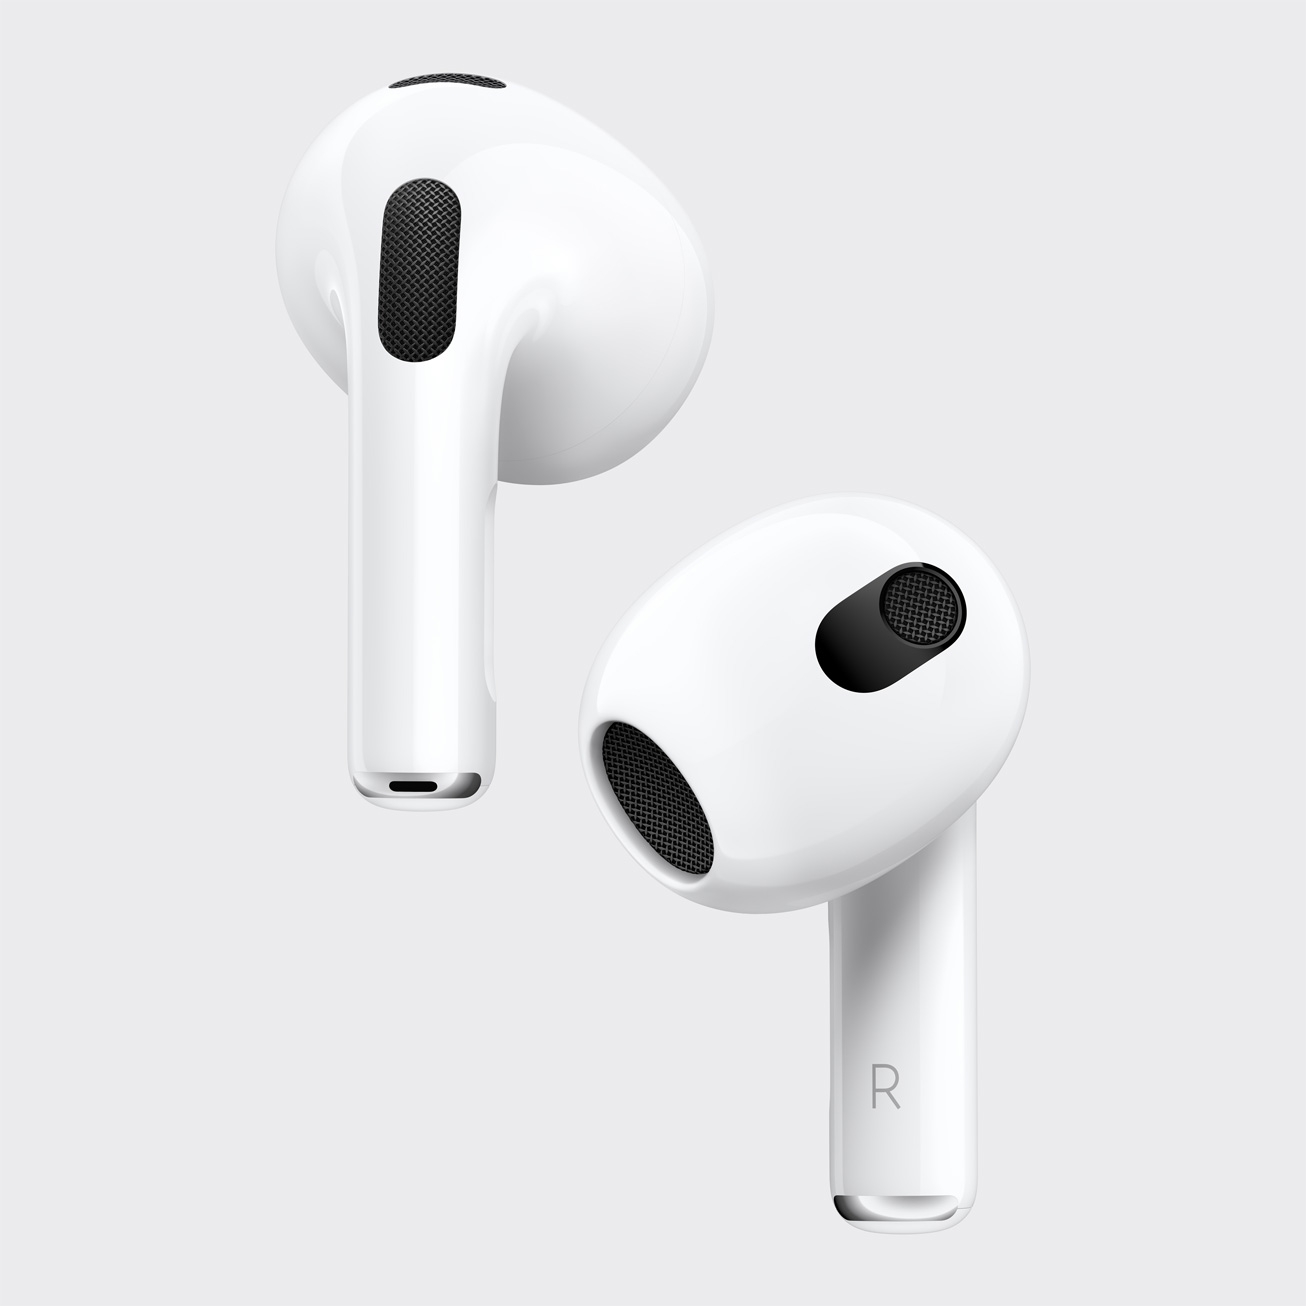 Two Apple AirPods 4 models now expected to arrive in September or 